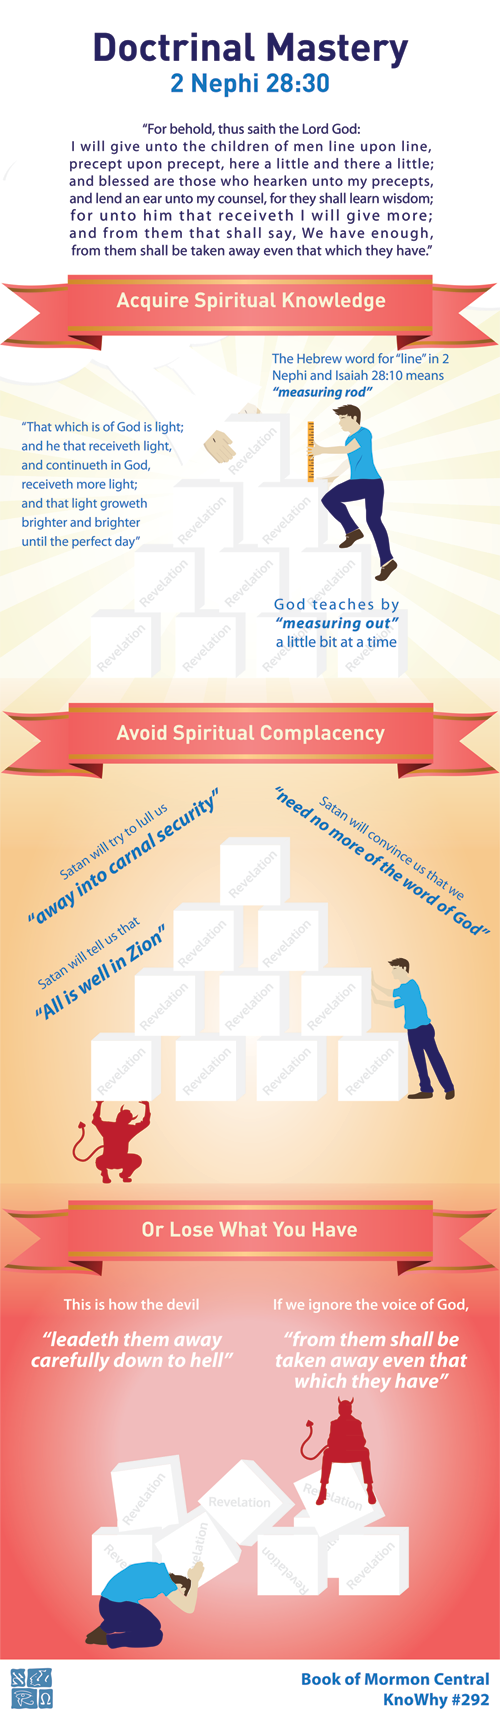 Doctrinal Mastery 2 Nephi 28:30 Infographic by Book of Mormon Central